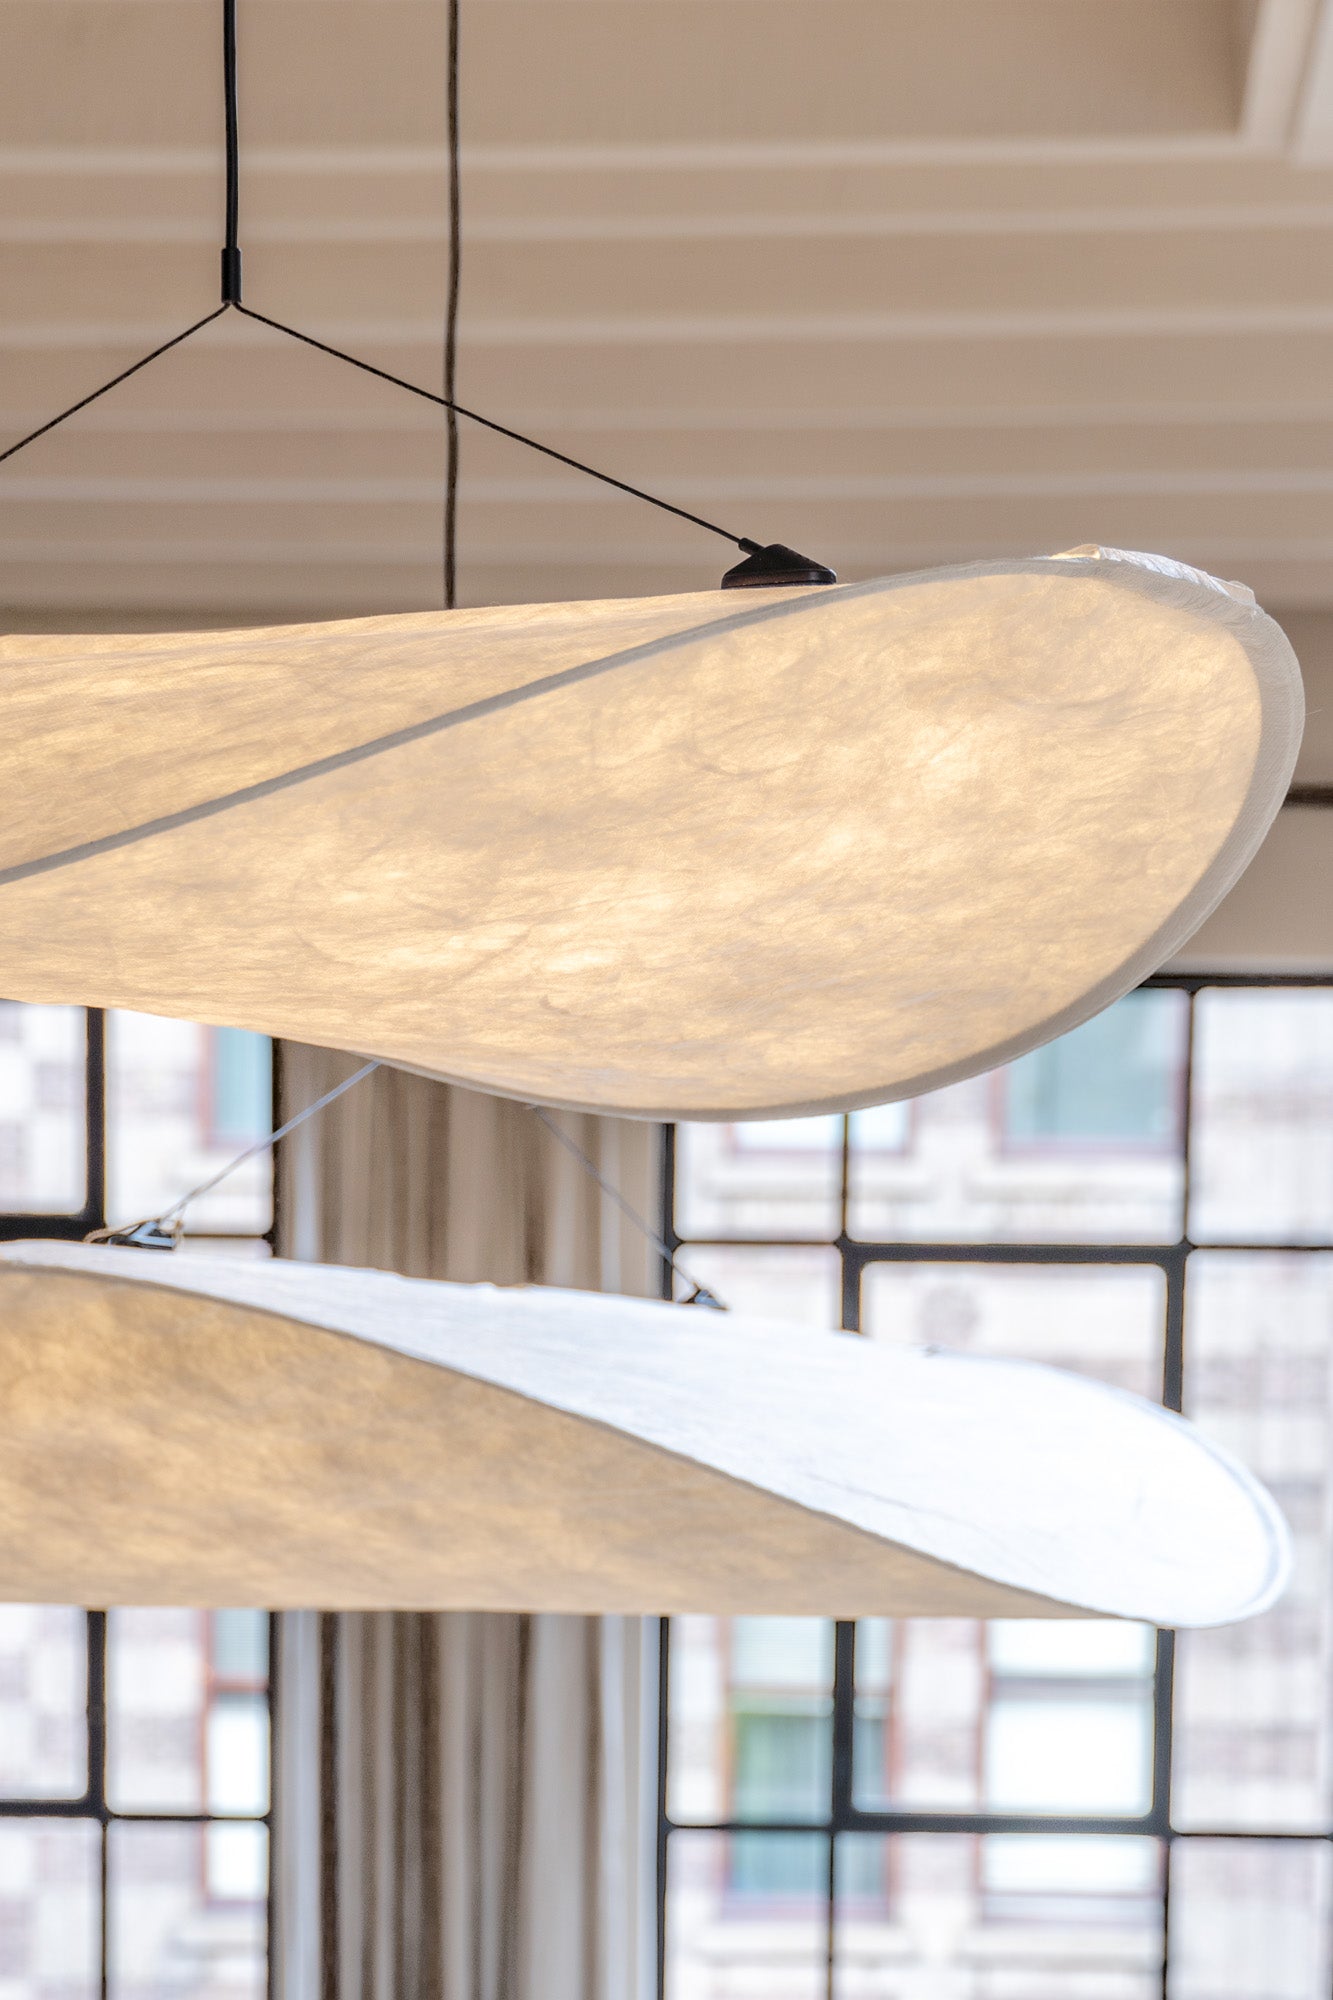 Side view of the Tense Pendant Lamp by New Works.